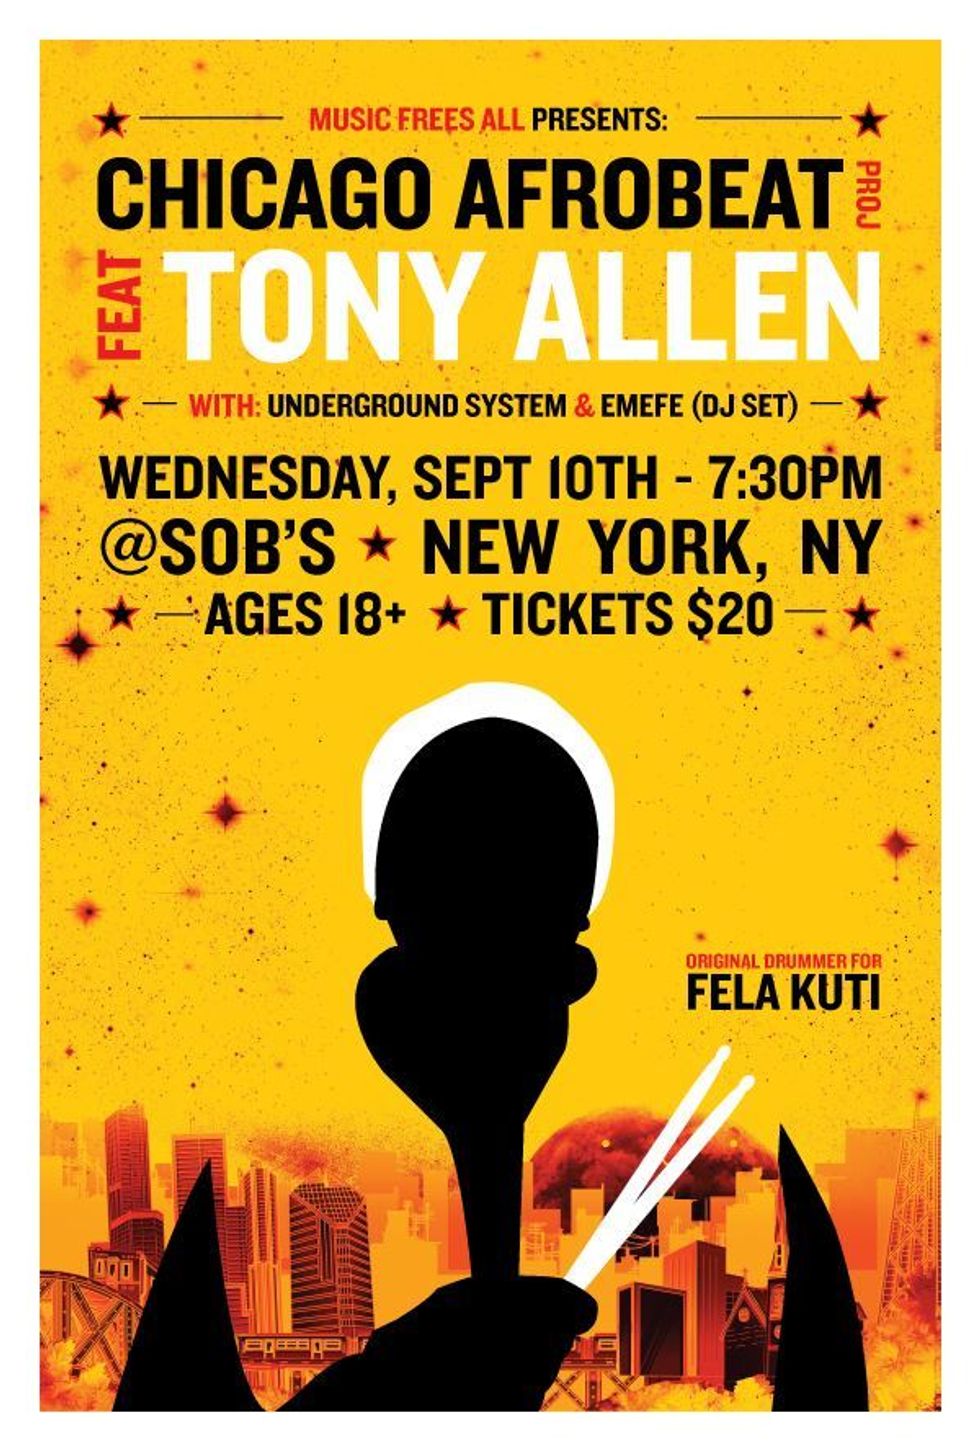 Tony Allen Live In NYC w/ Chicago Afrobeat Project